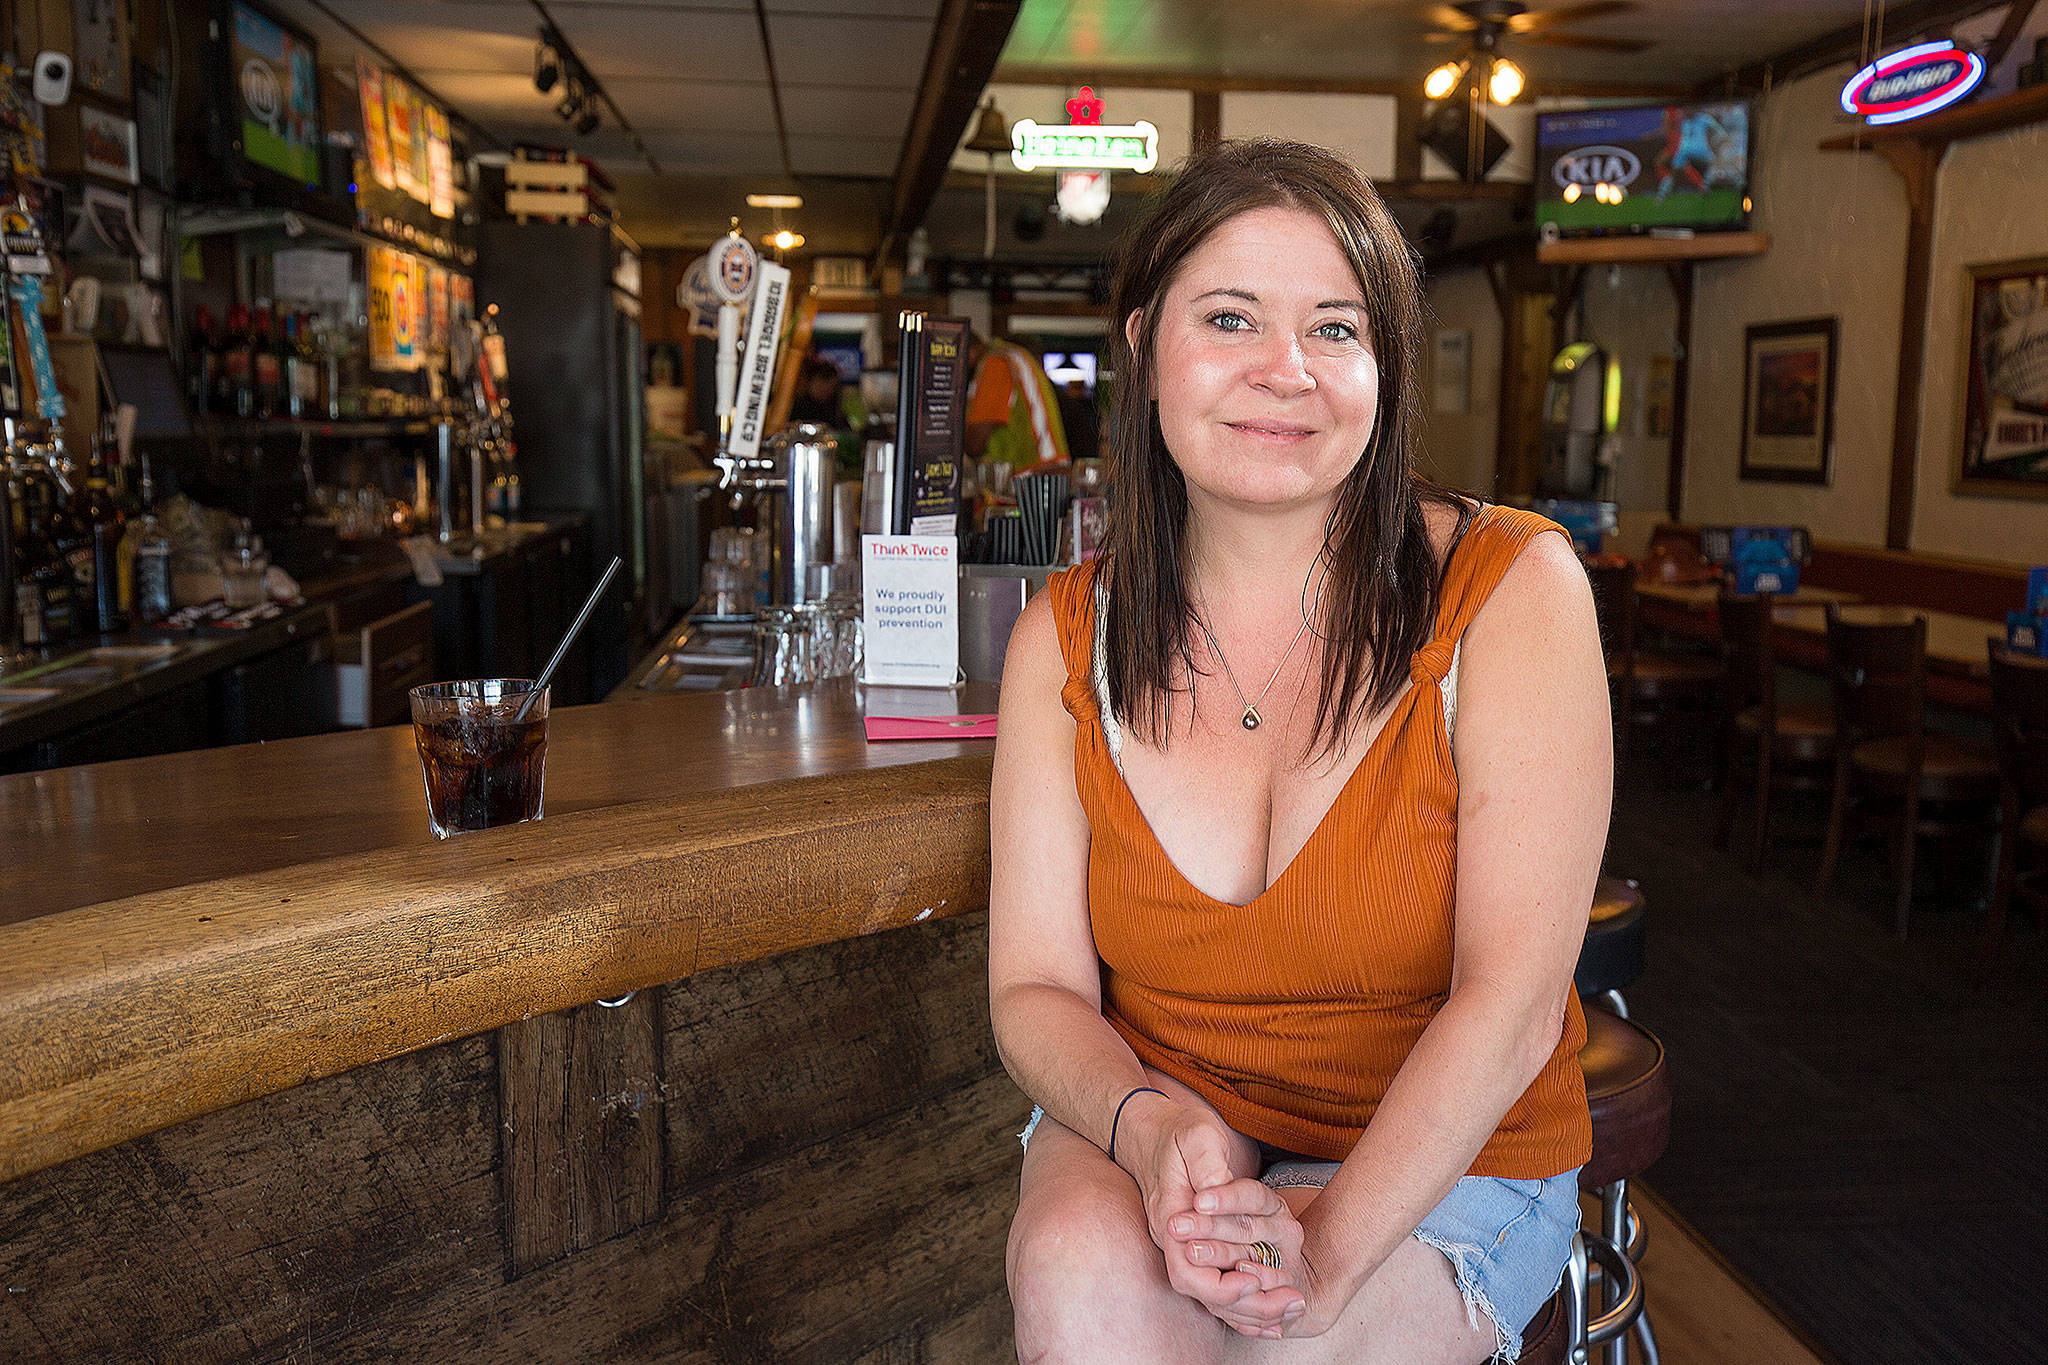 Nicole Geer tends bar at Engel’s Pub, one of the oldest businesses in Edmonds. (Andy Bronson / The Herald)